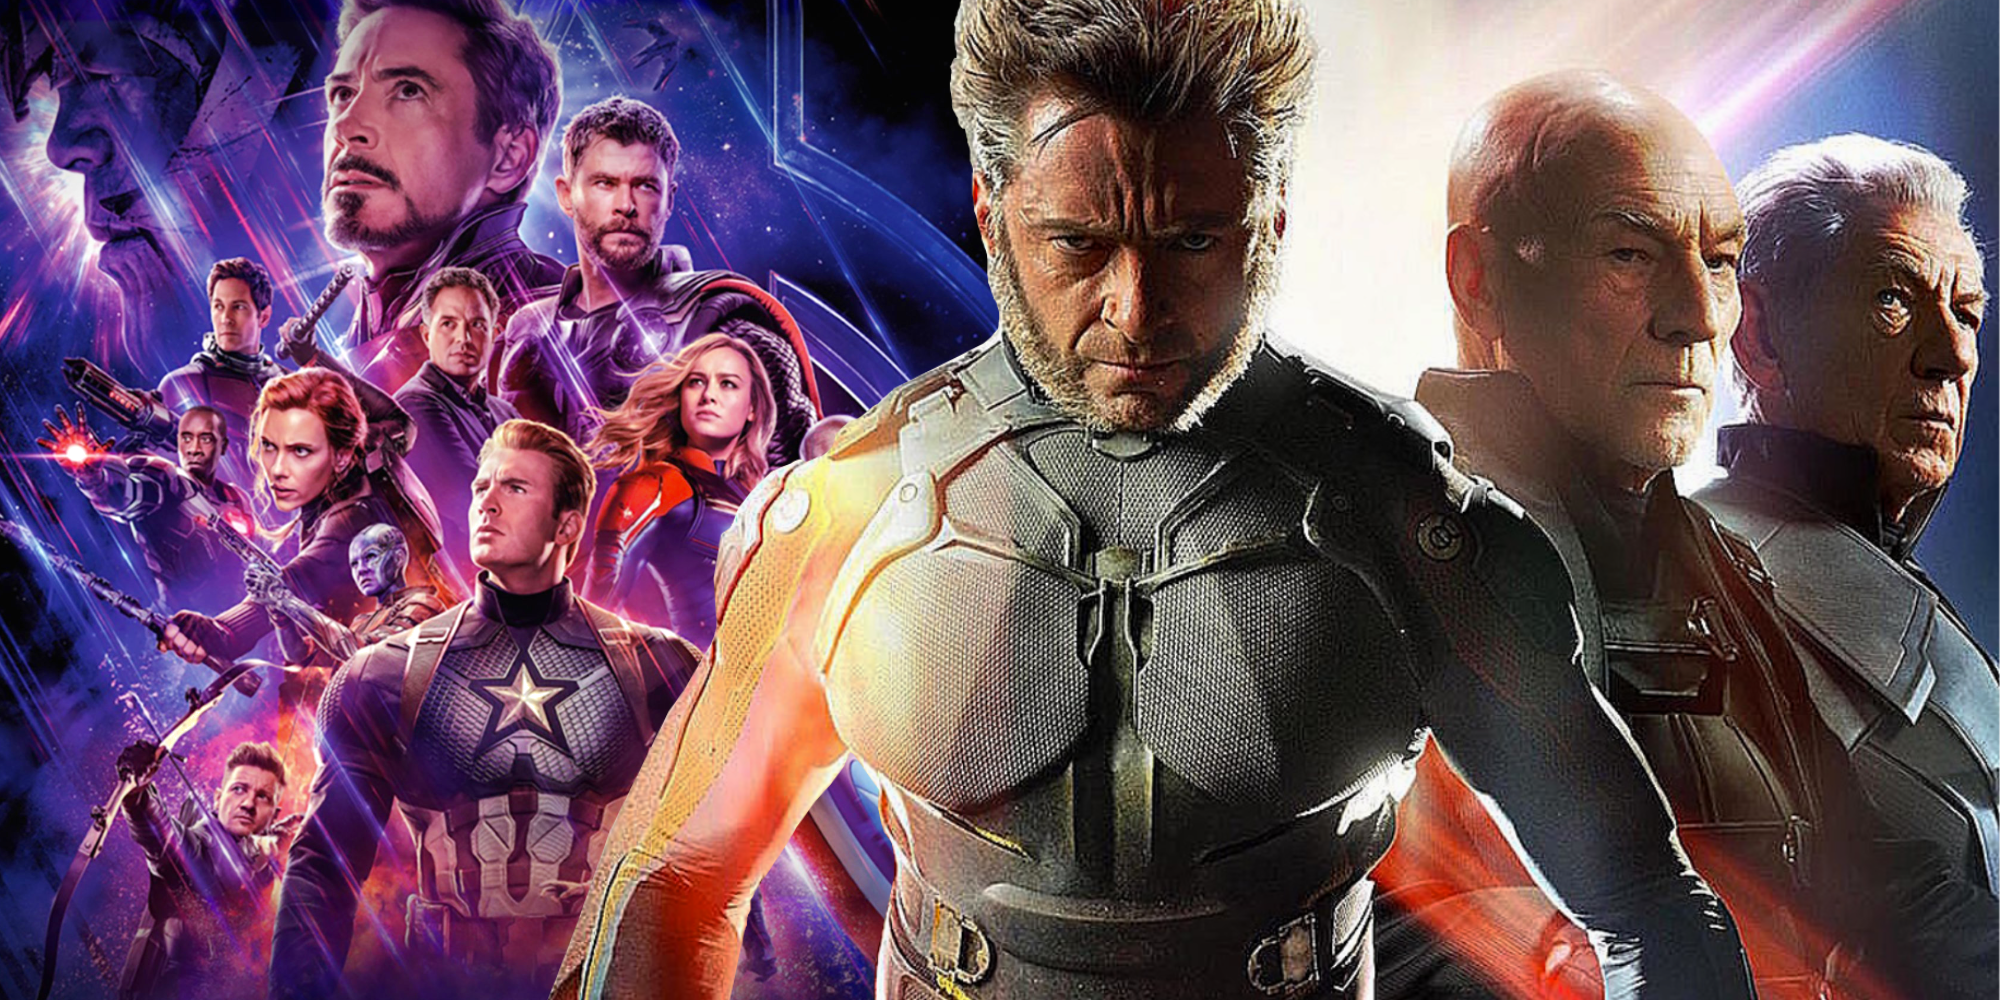 A massive 'Avengers 5' crossover movie with X-Men is already in the works